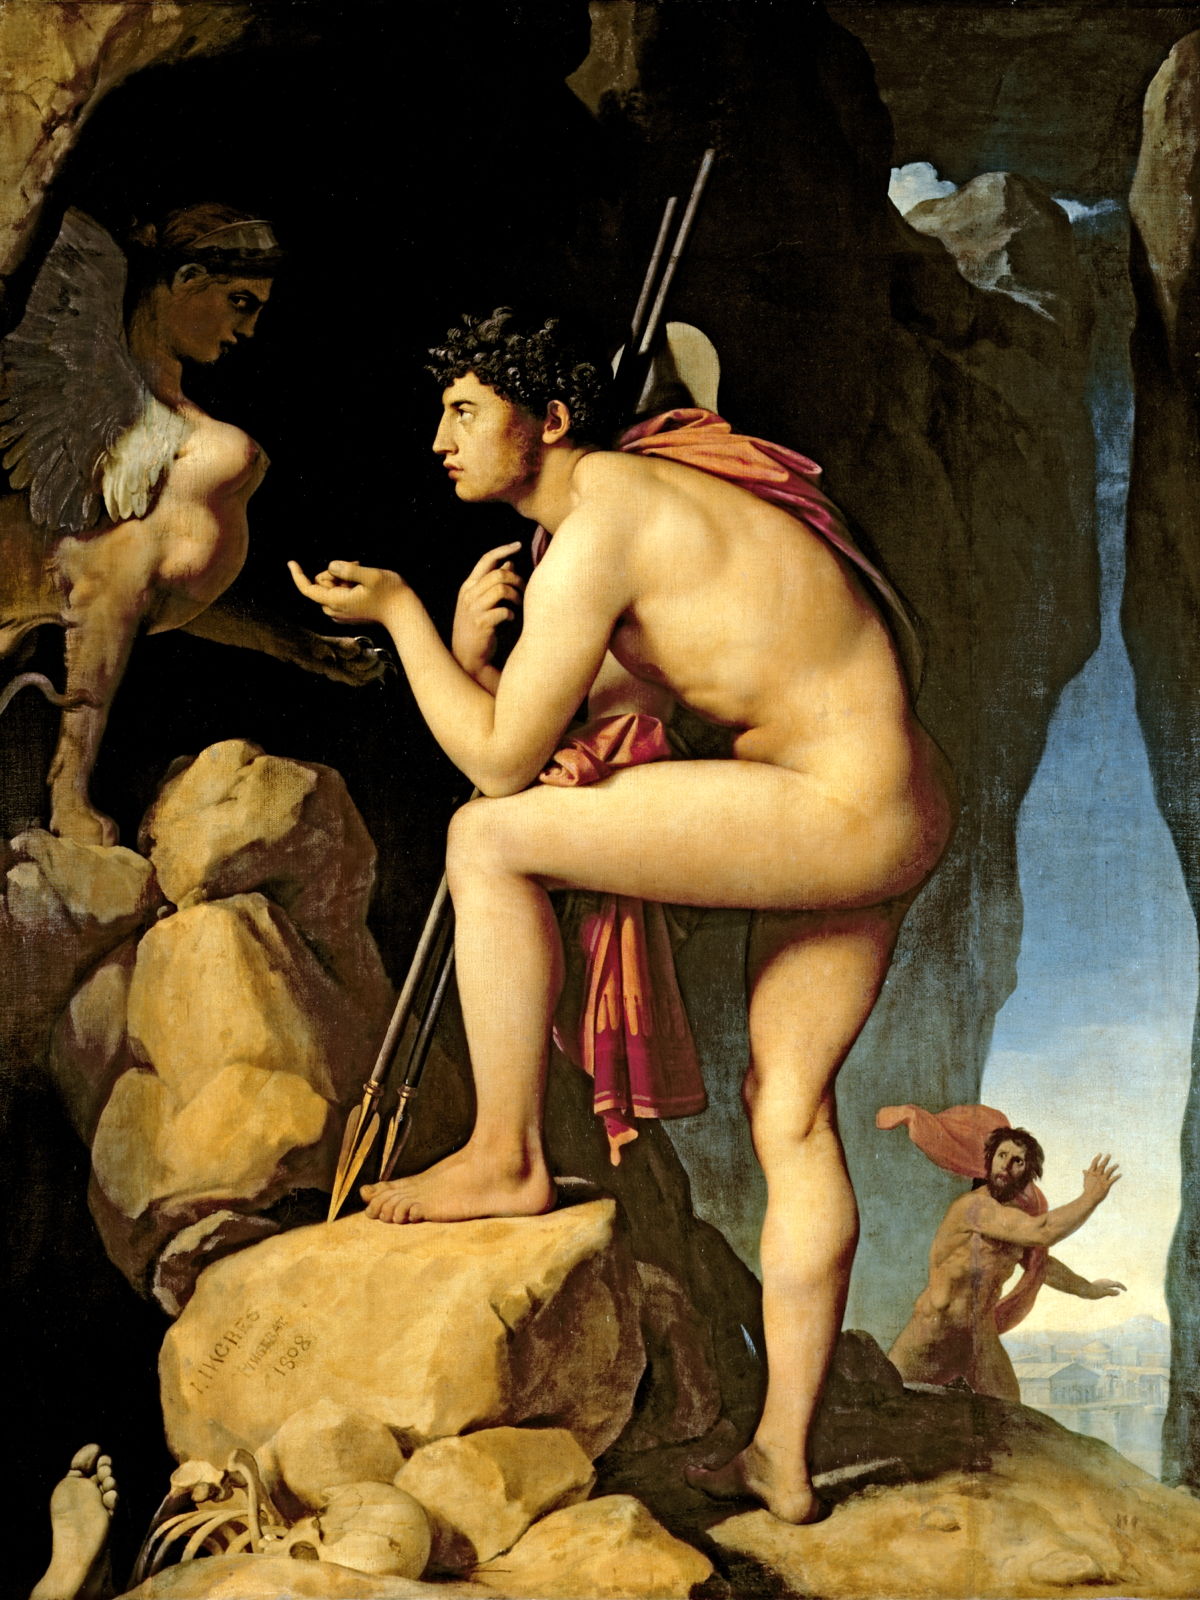 Oedipus and the Sphinx: Jean Auguste Dominique Ingres, 1808, Oedipus answer the riddle of the Sphinx.; paintings; Jean Auguste Dominique Ingres; Oedipus; sphinxes